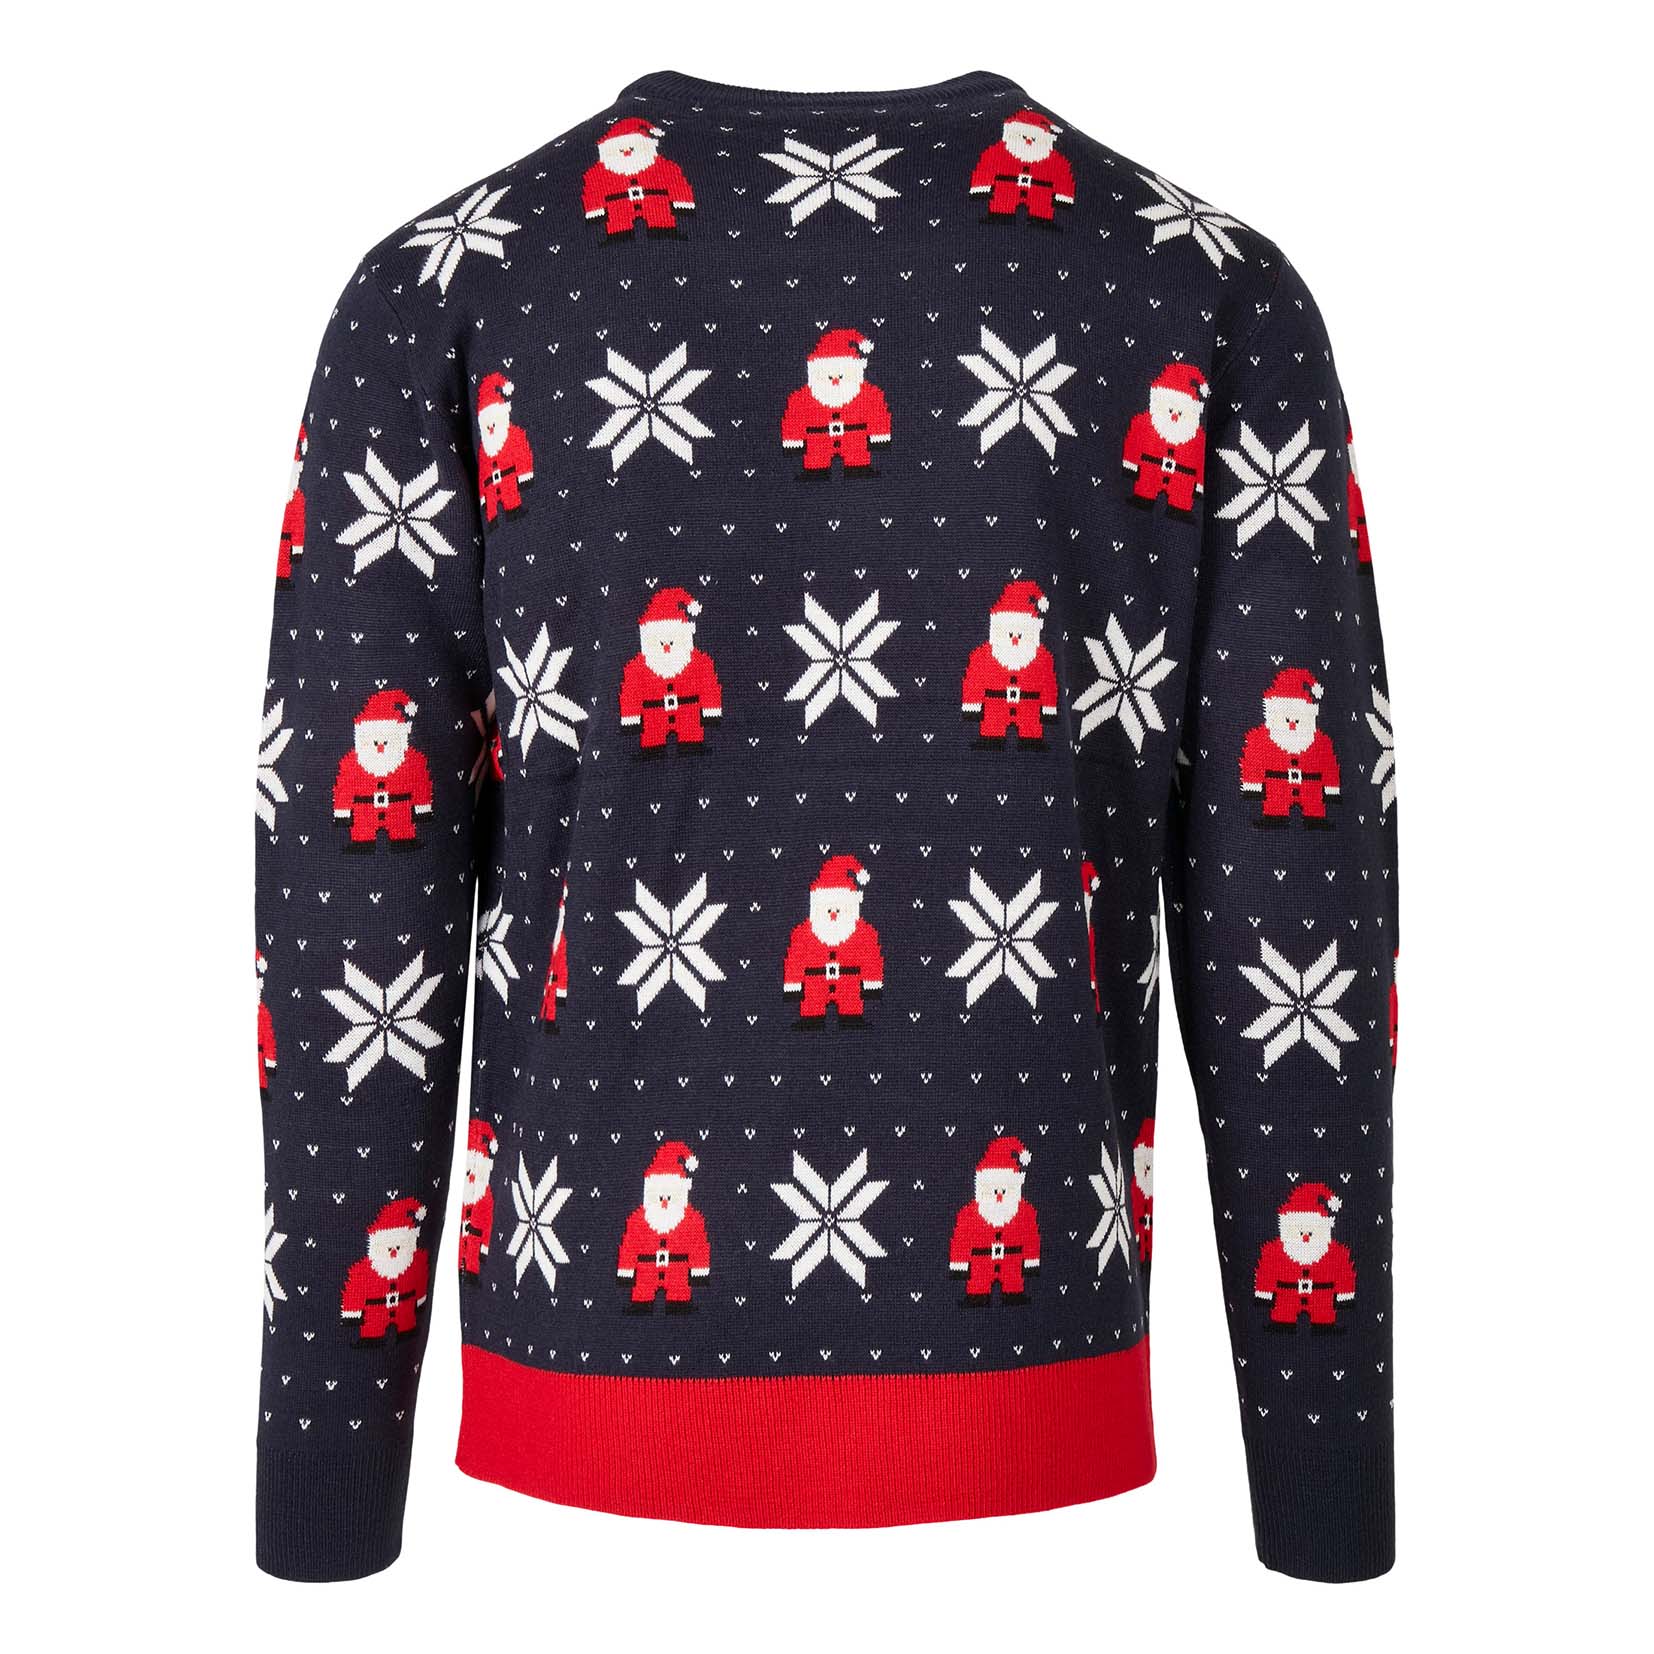 Urban Classics Sweater Nicolaus and Snowflakes (blue)